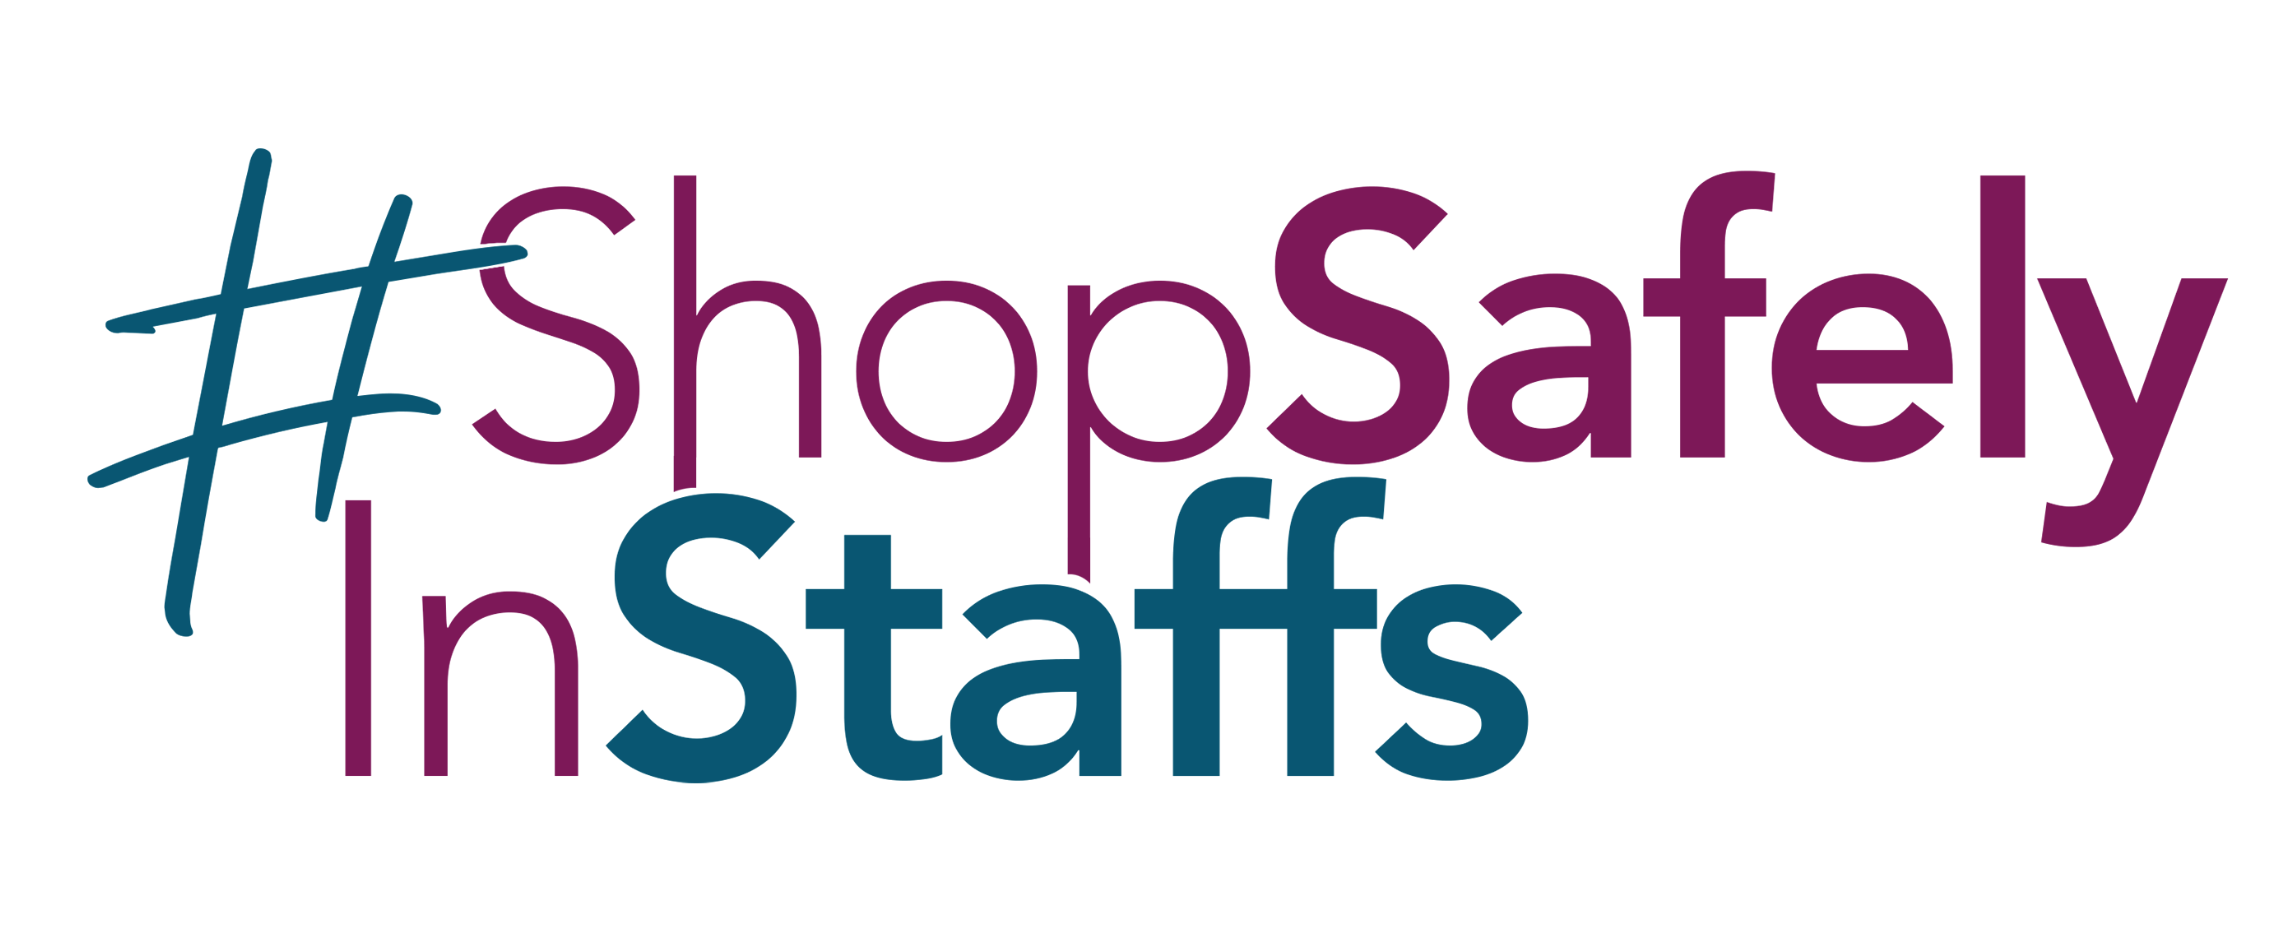 Local businesses get involved with the #ShopSafelyinStaffs campaign!